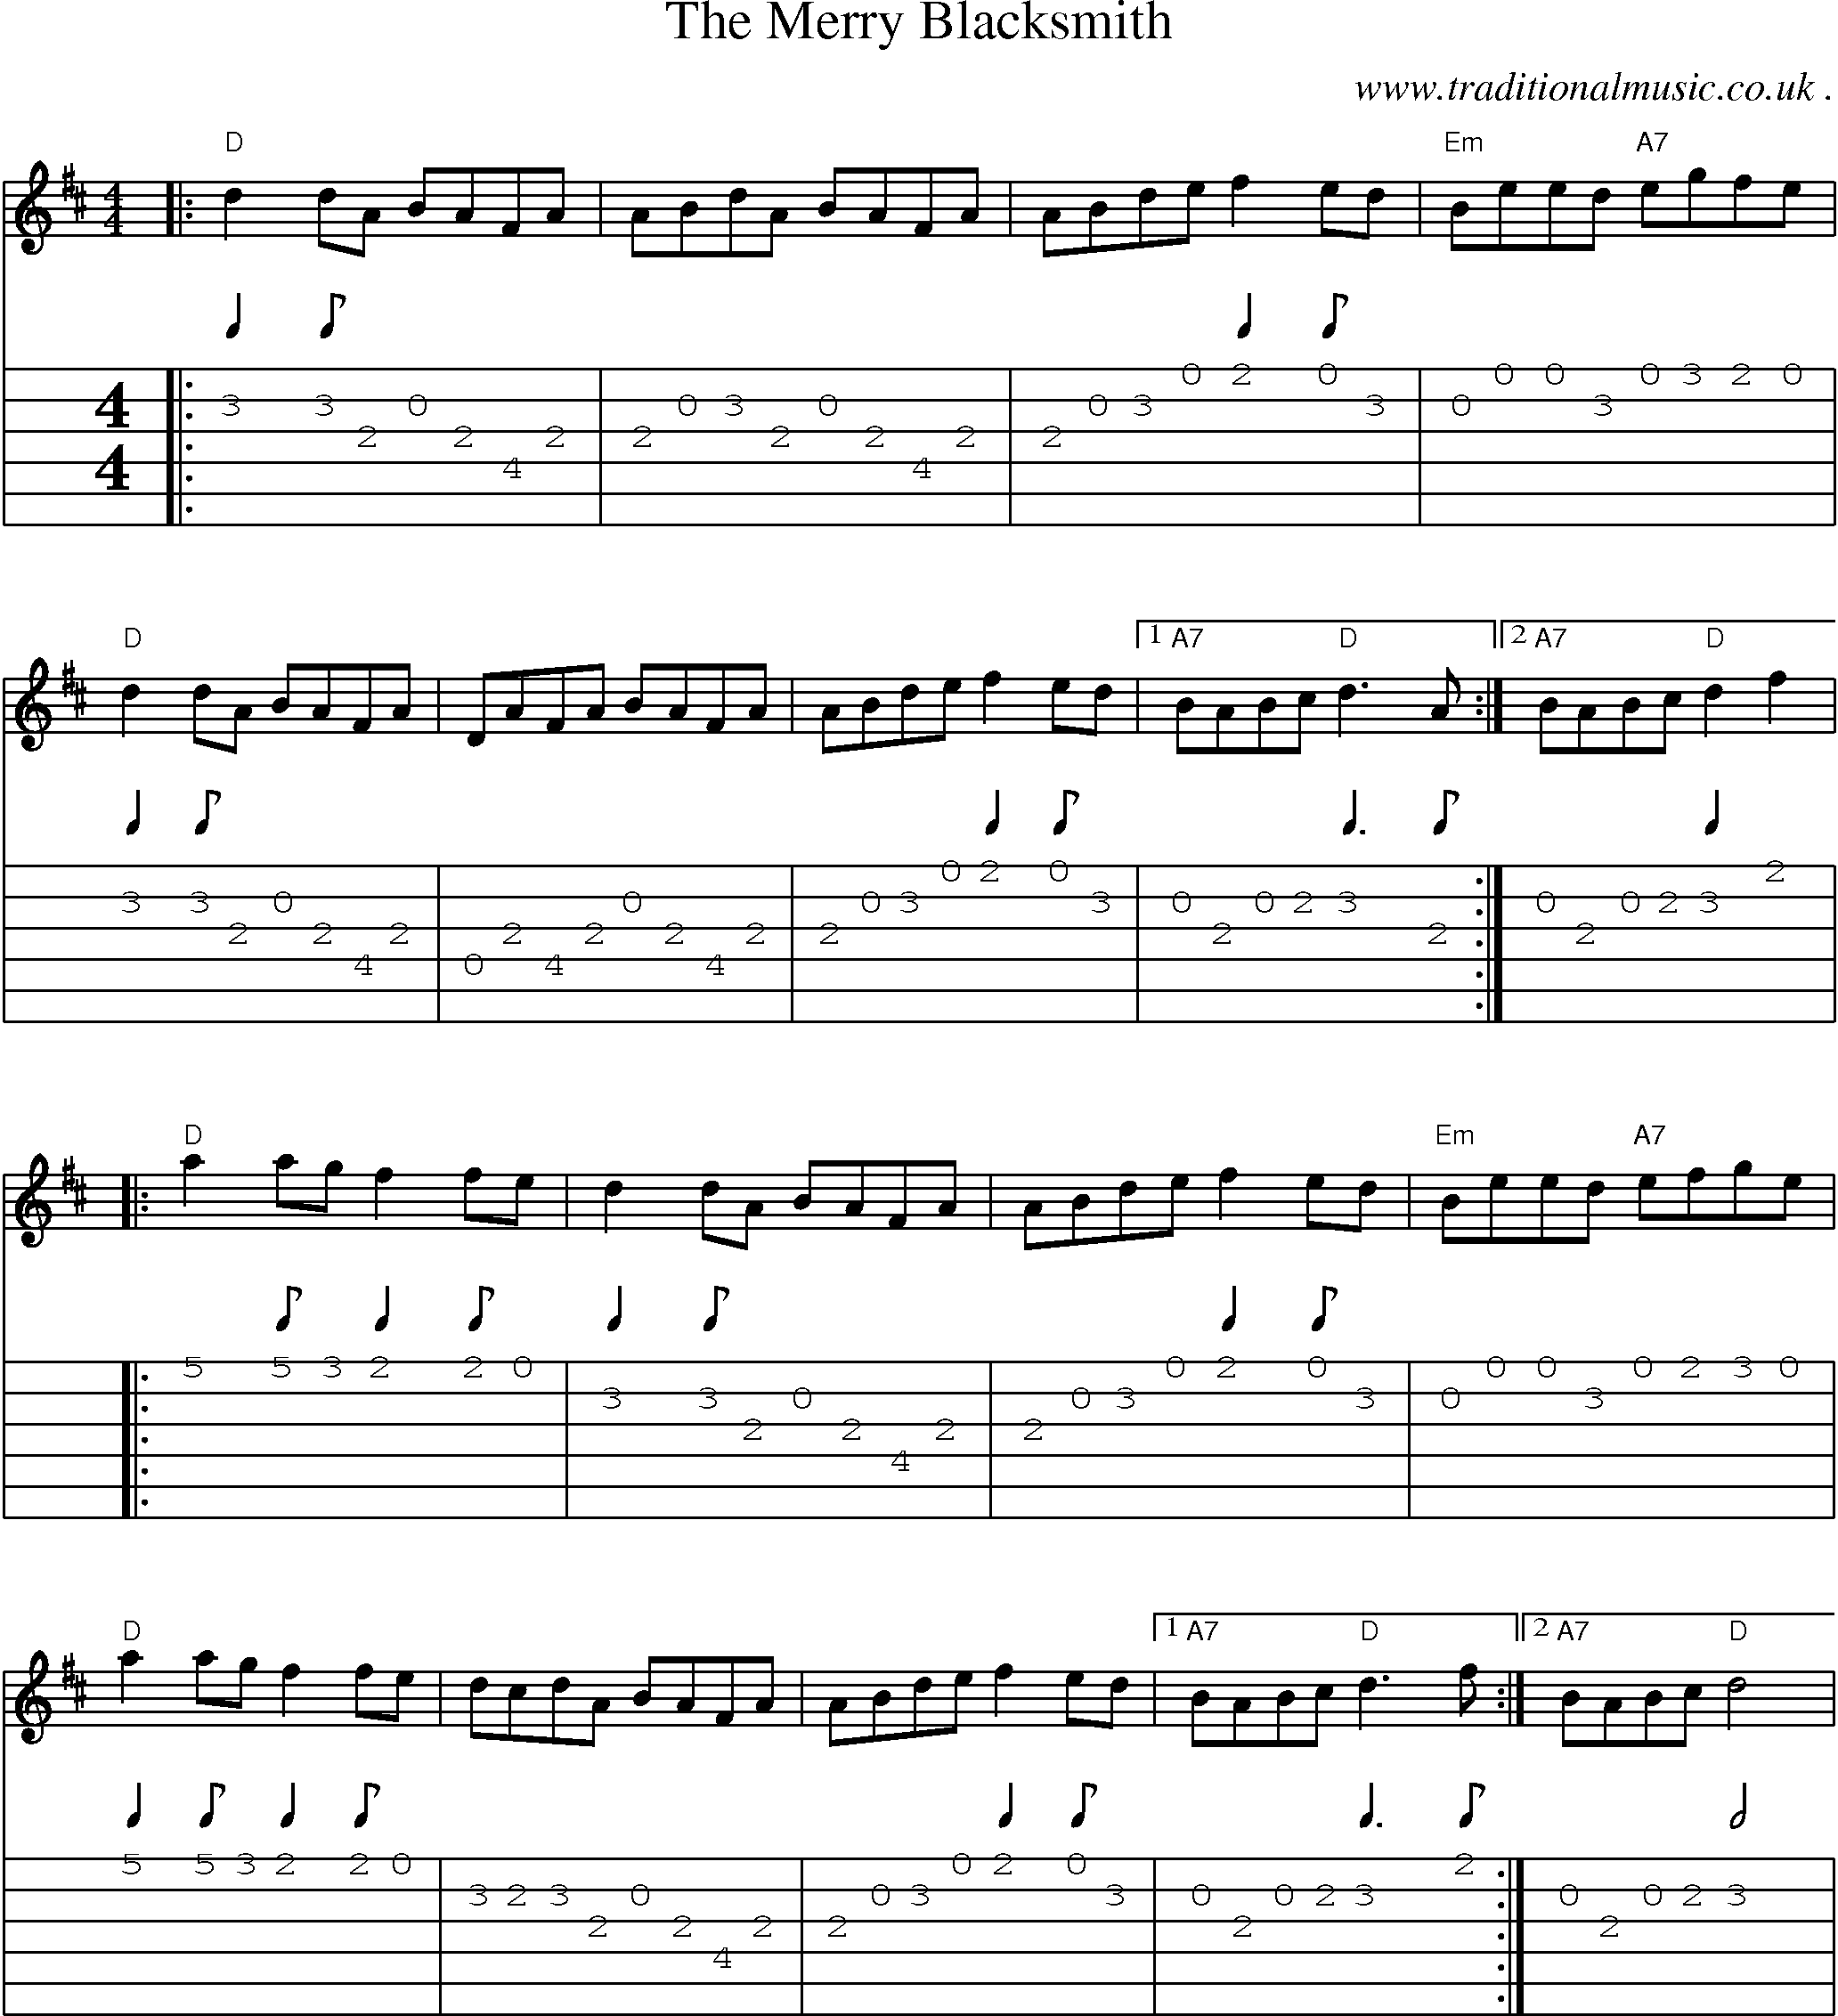 Music Score and Guitar Tabs for The Merry Blacksmith